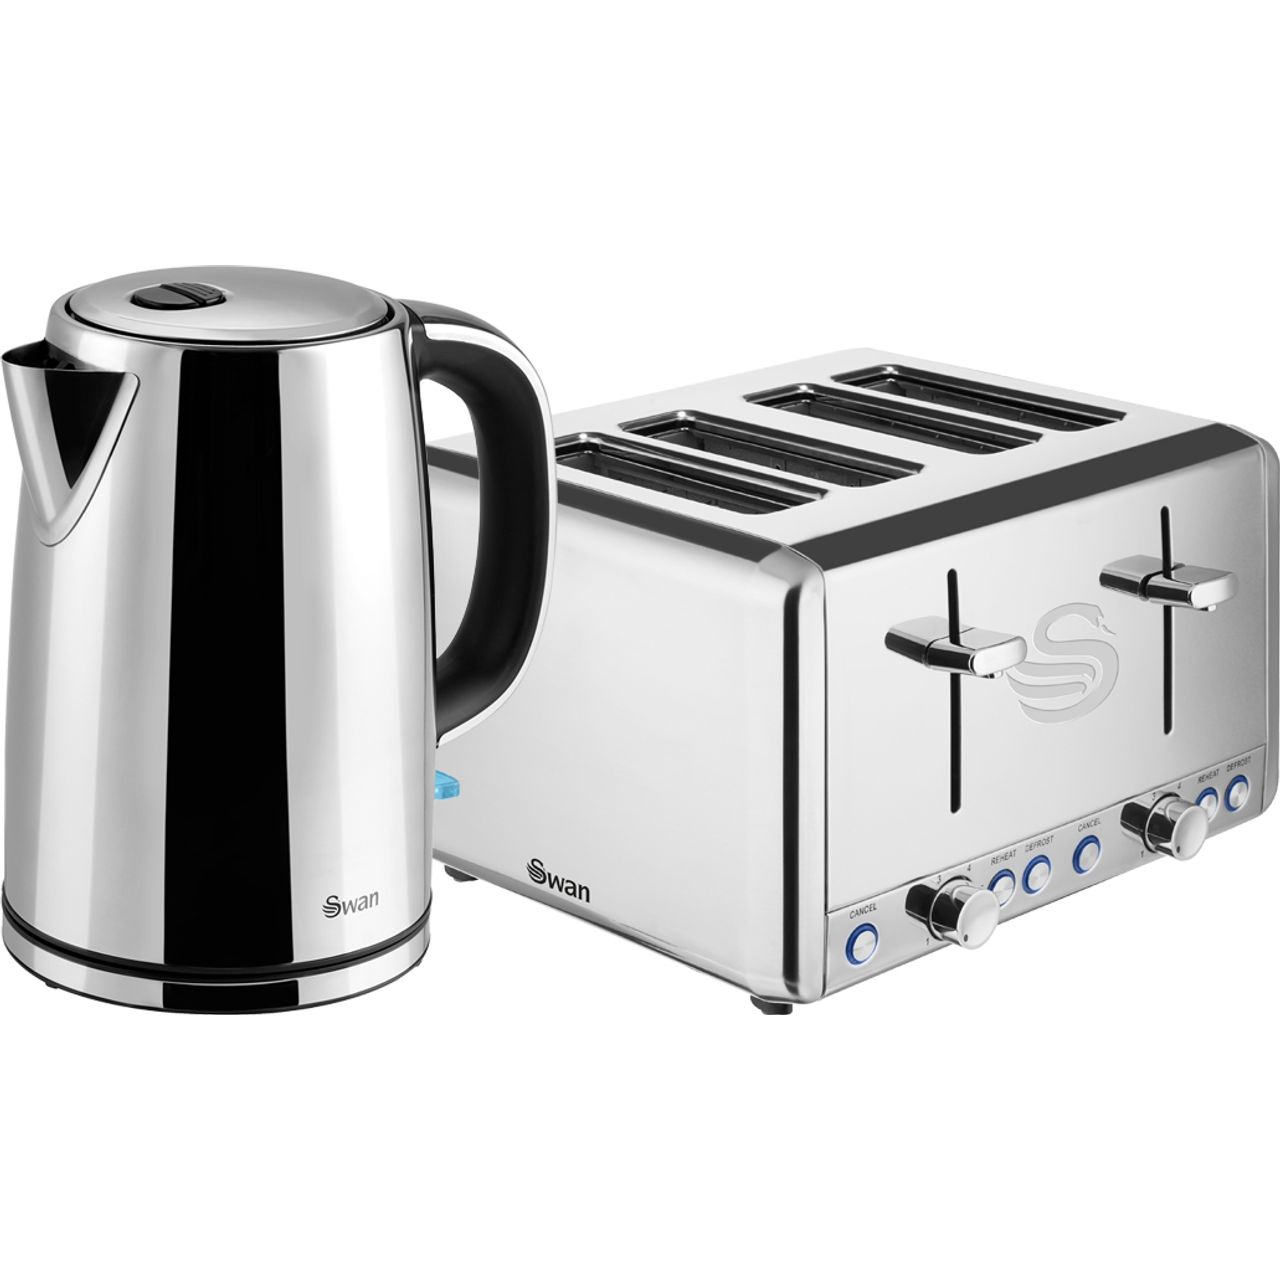 Swan STP2081N Kettle And Toaster Sets Review